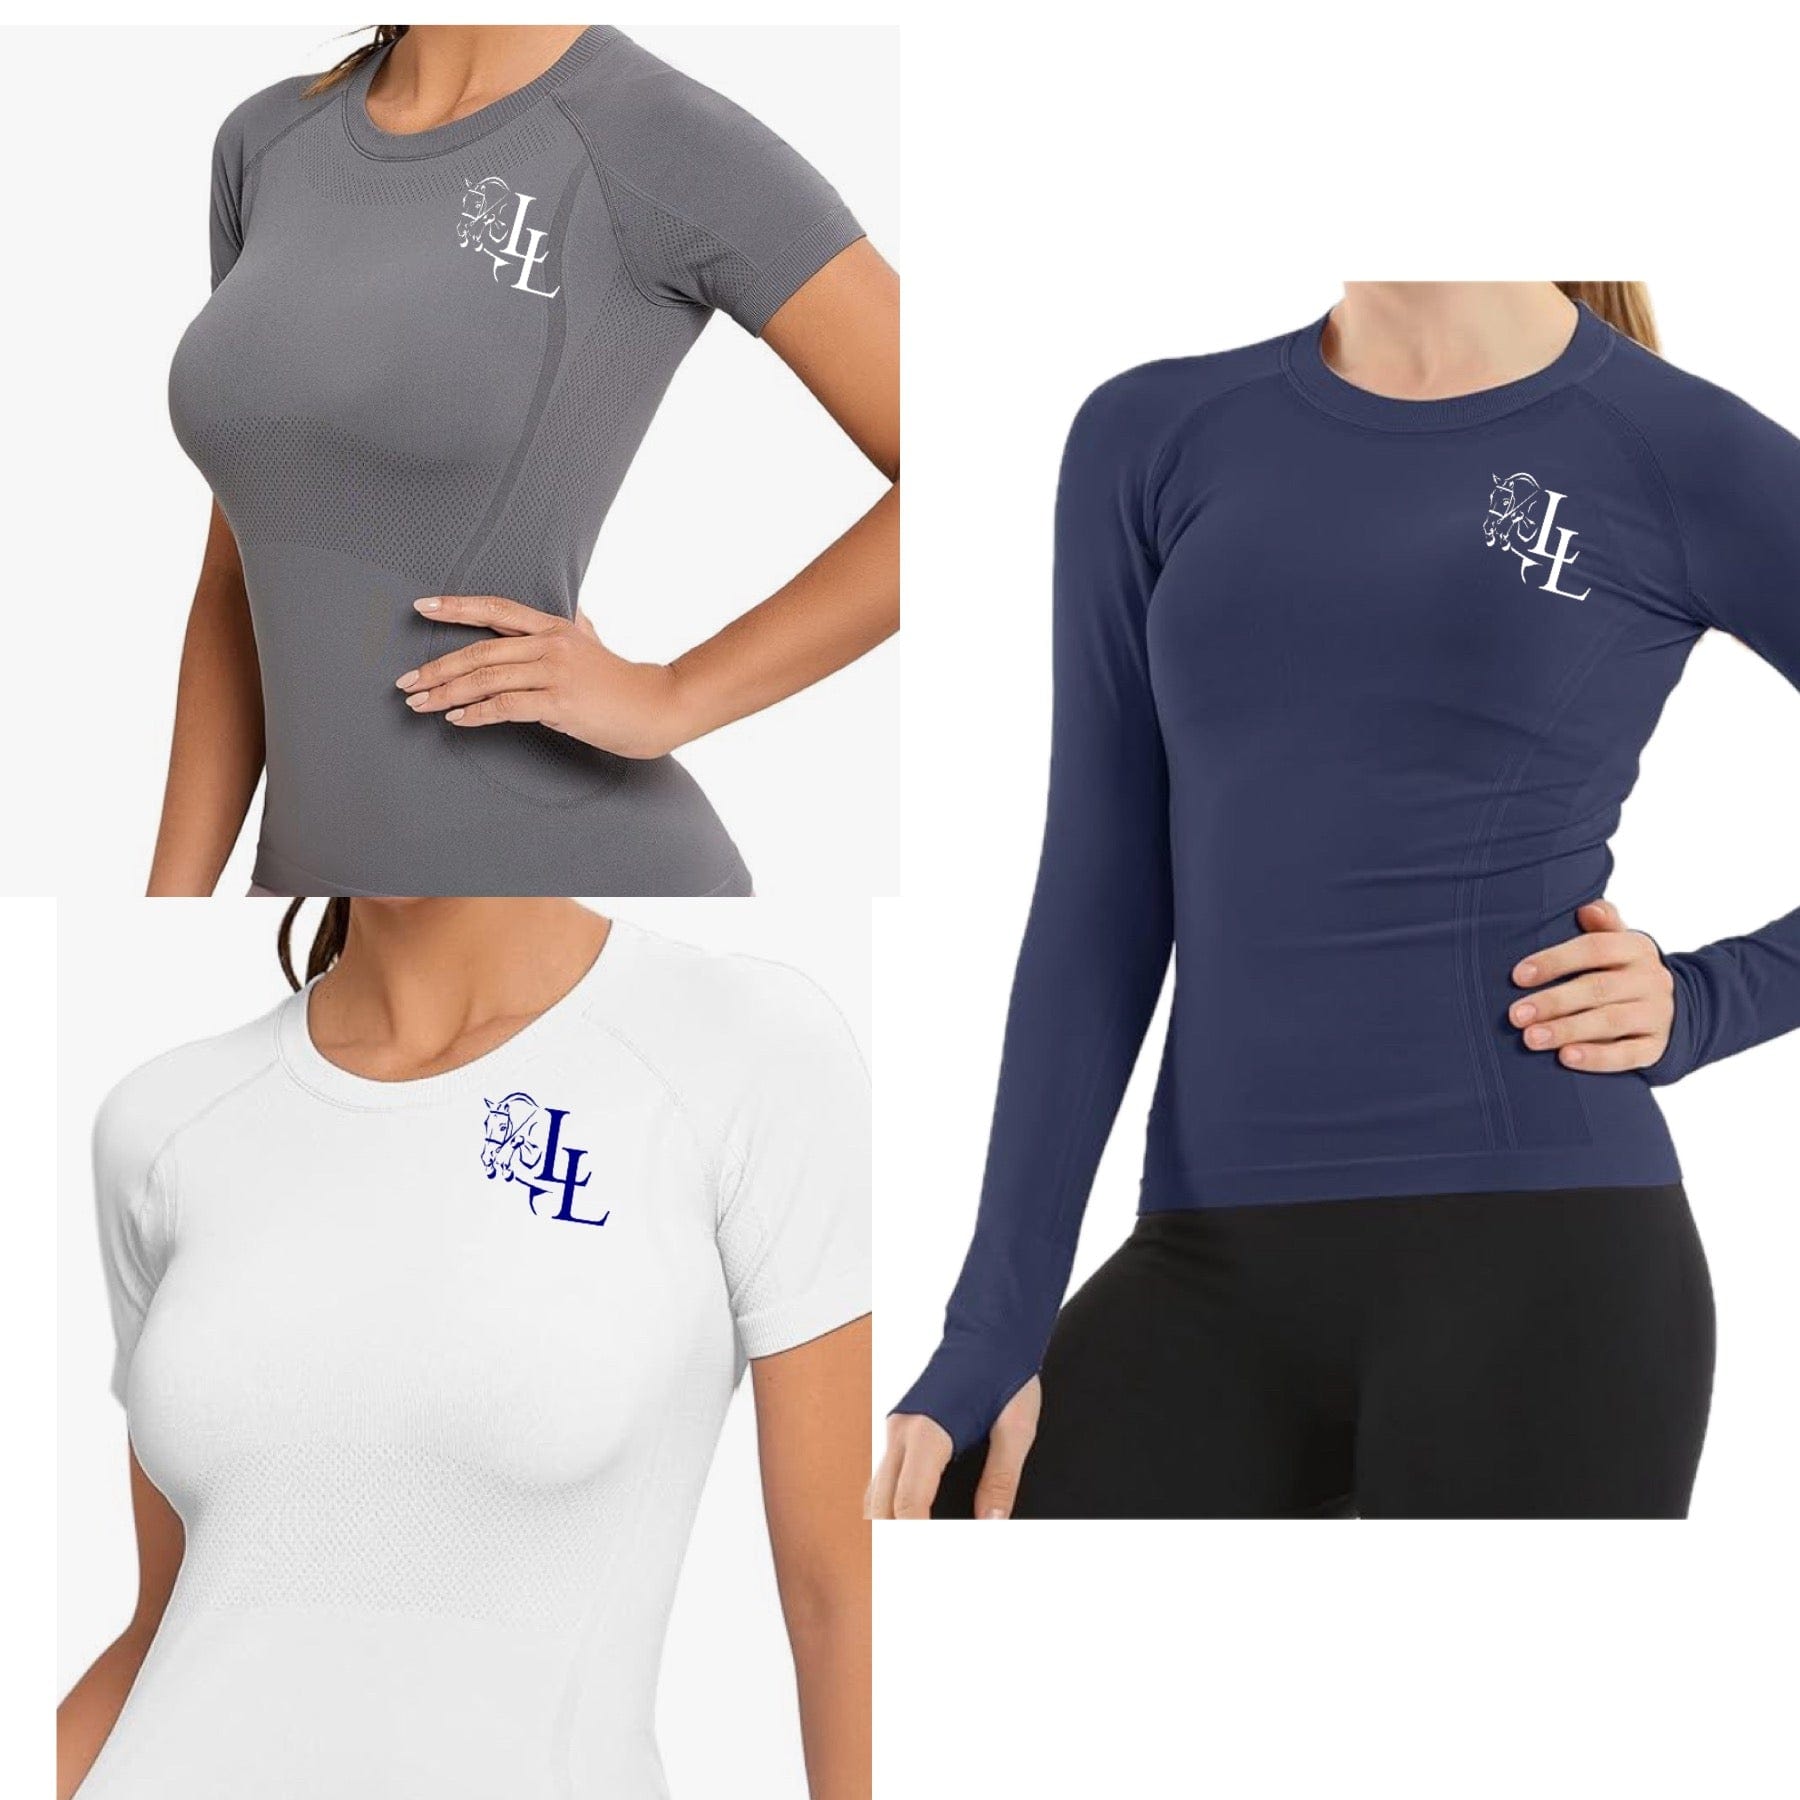 Equestrian Team Apparel Double L Stables Tech Shirt equestrian team apparel online tack store mobile tack store custom farm apparel custom show stable clothing equestrian lifestyle horse show clothing riding clothes horses equestrian tack store